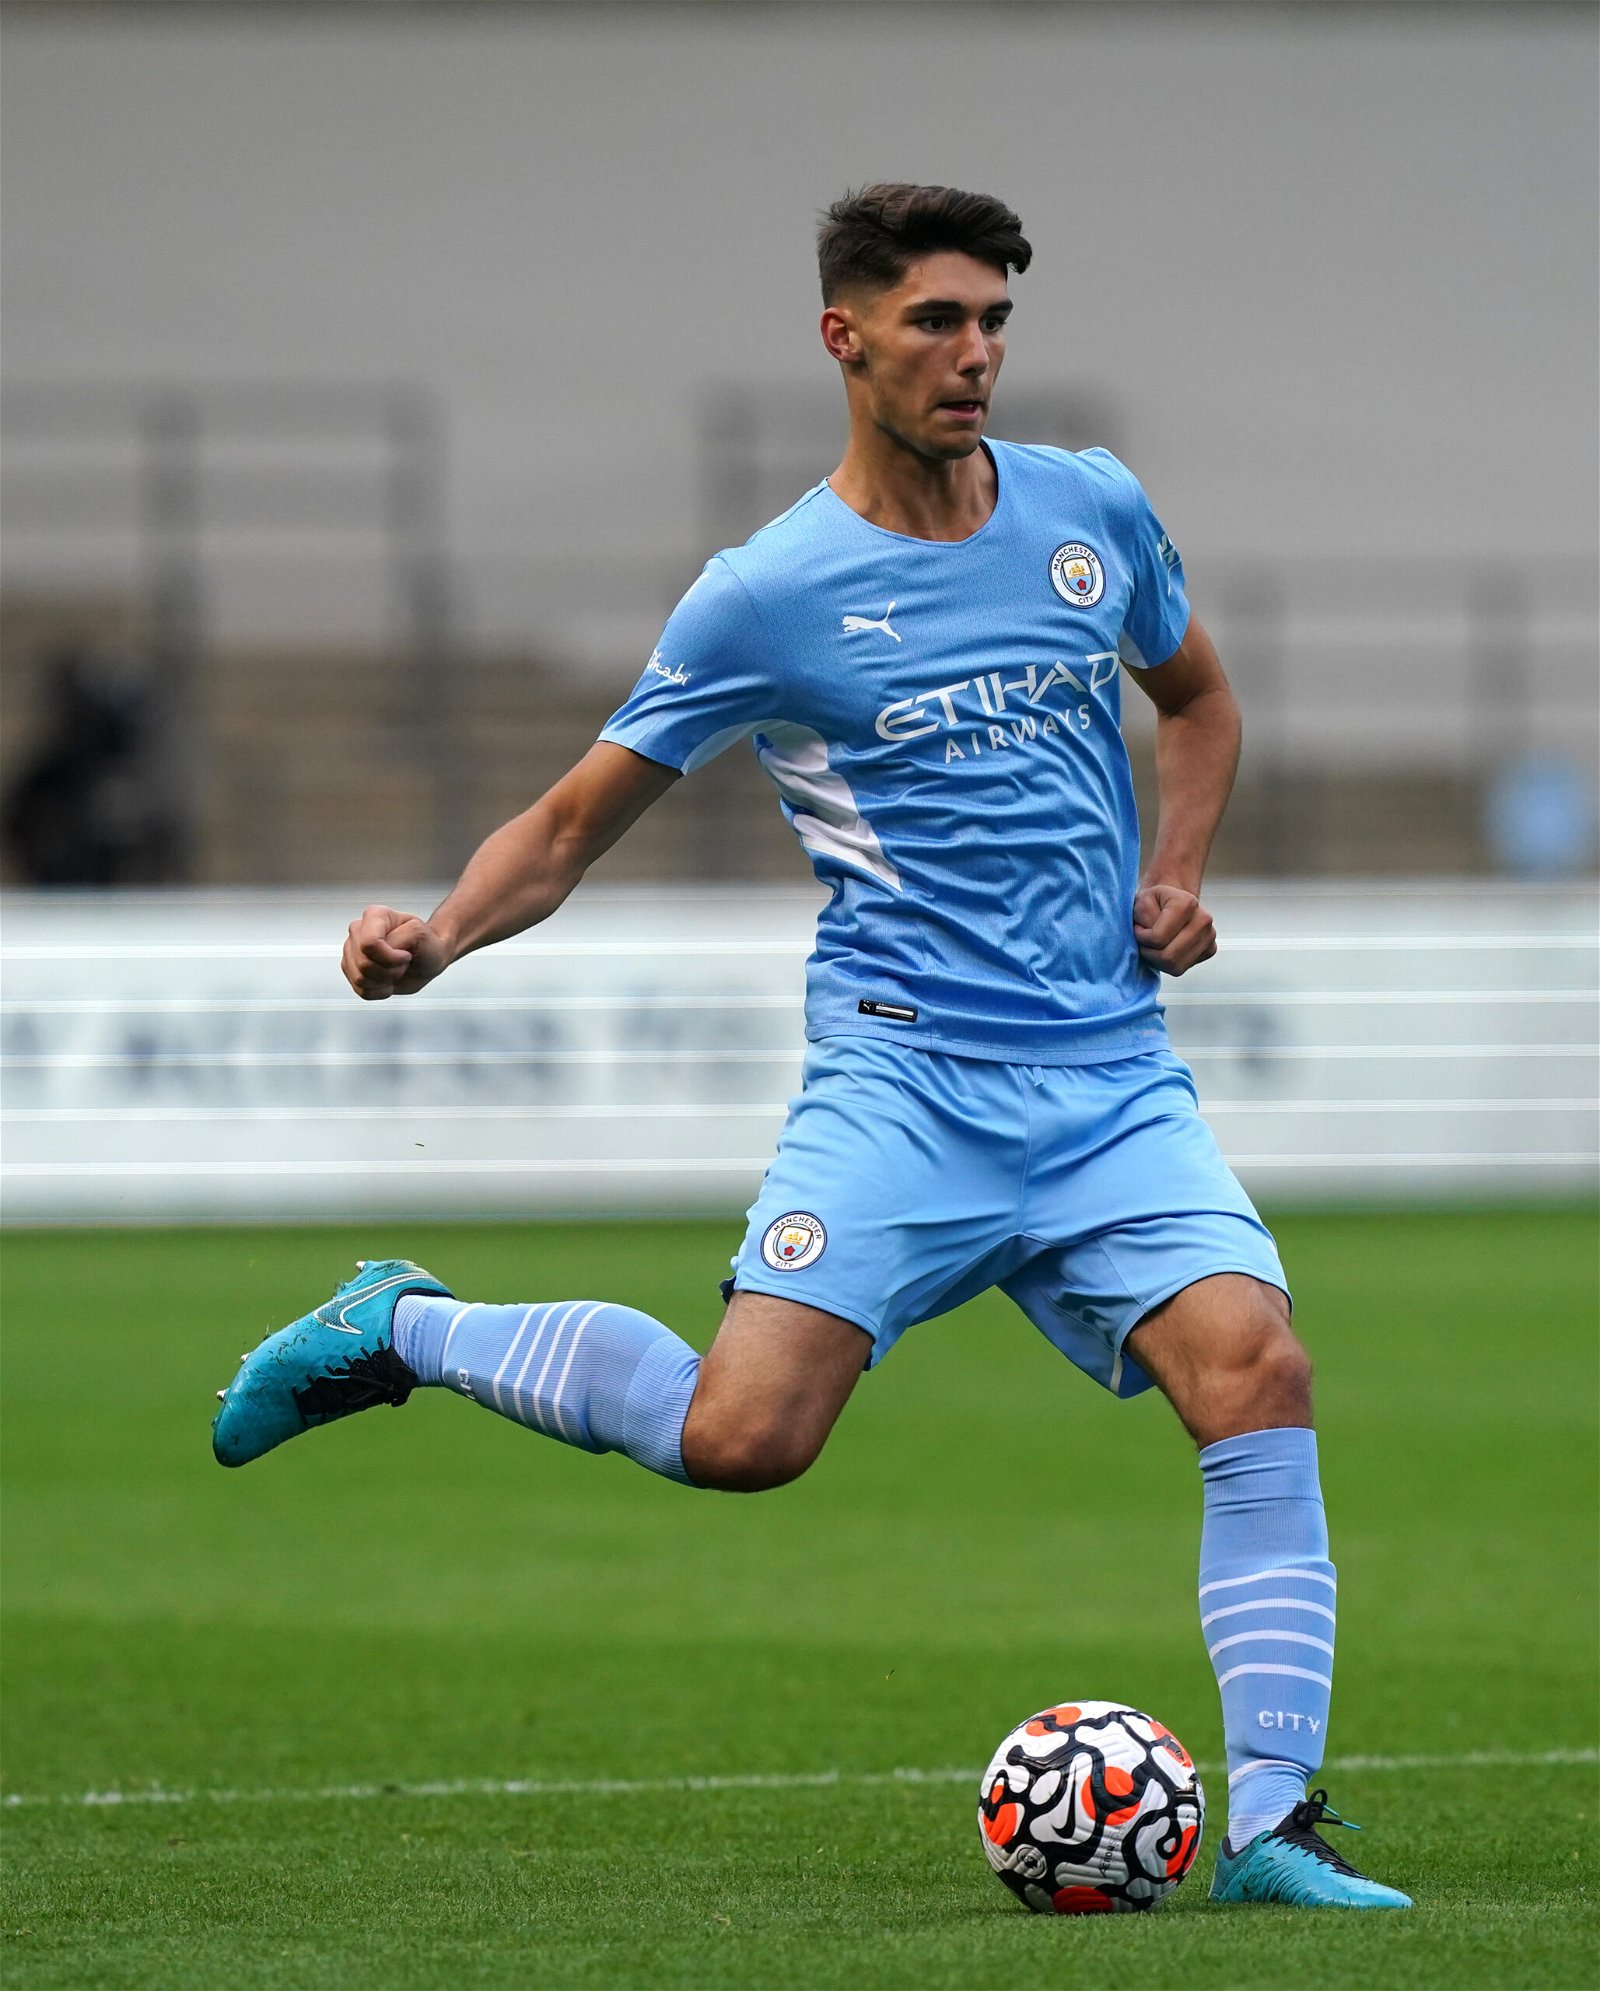 Three Championship Clubs have set their eyes on Manchester City young defender